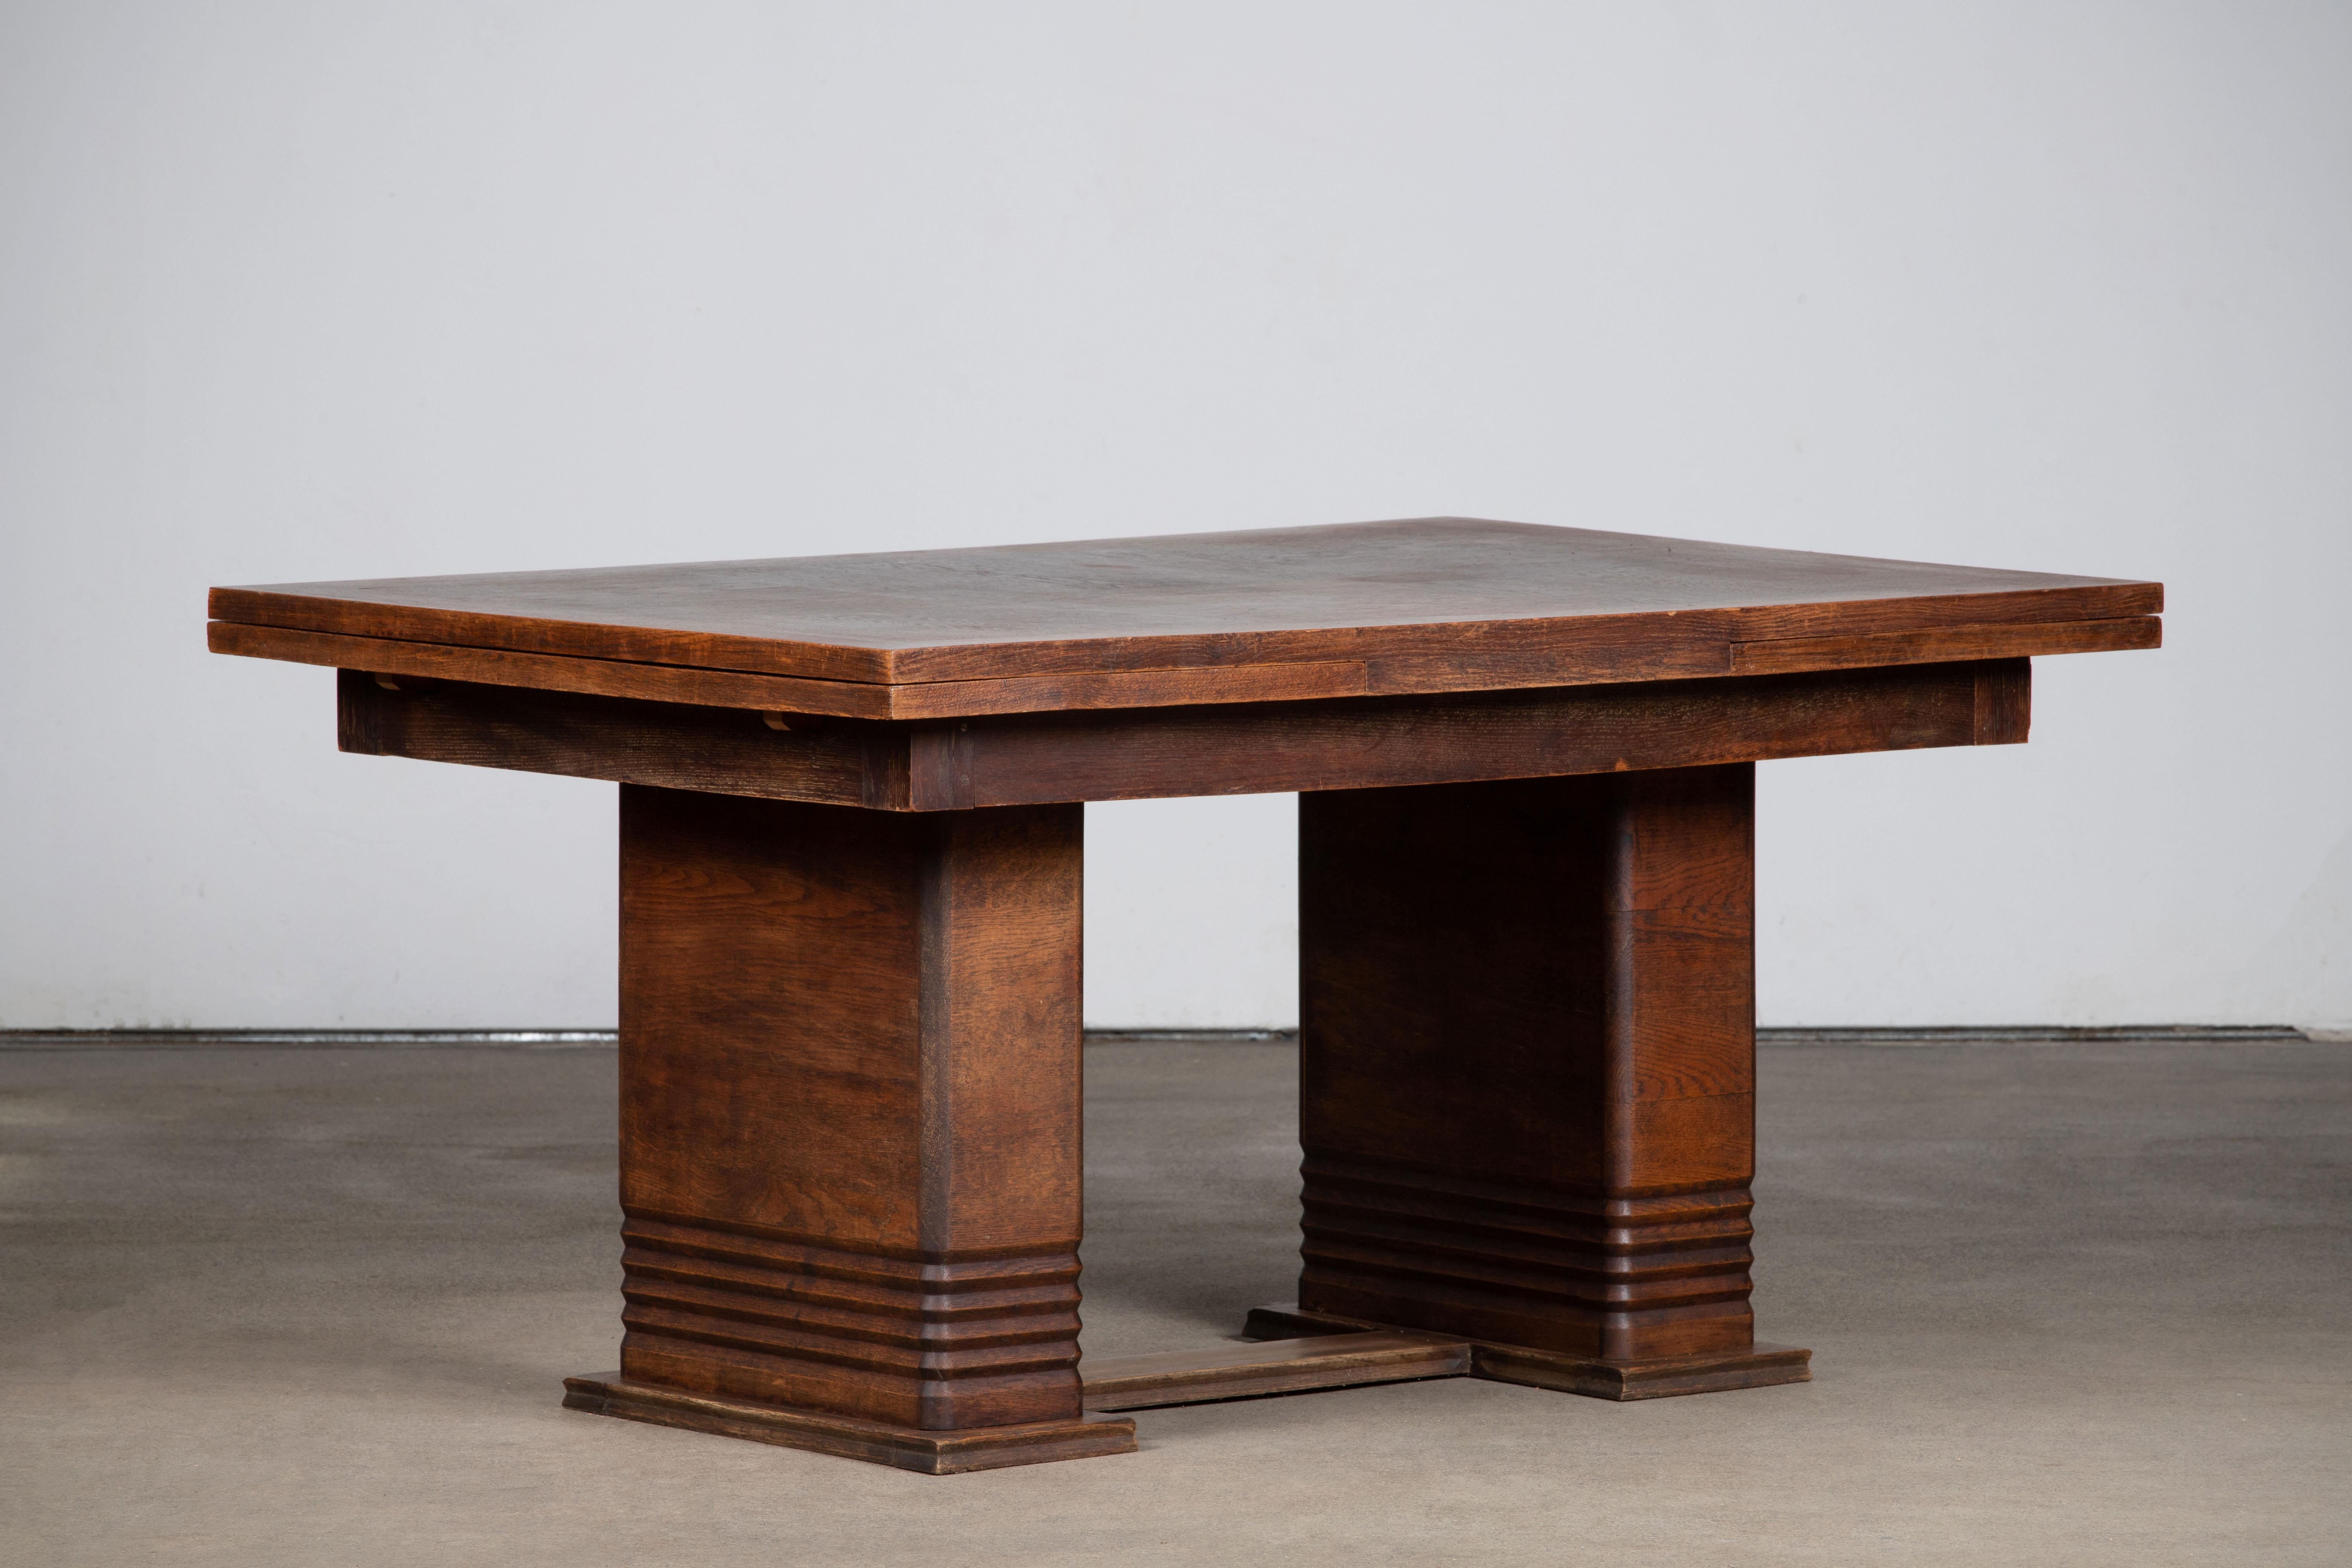 French Art Deco dining table. The table features stunning oak with a stunning patina.
It rests on tall and Brutalist tapered legs.
The table is in excellent original condition, with minor wear consistent with age and use.
Lenght varie from 139.5